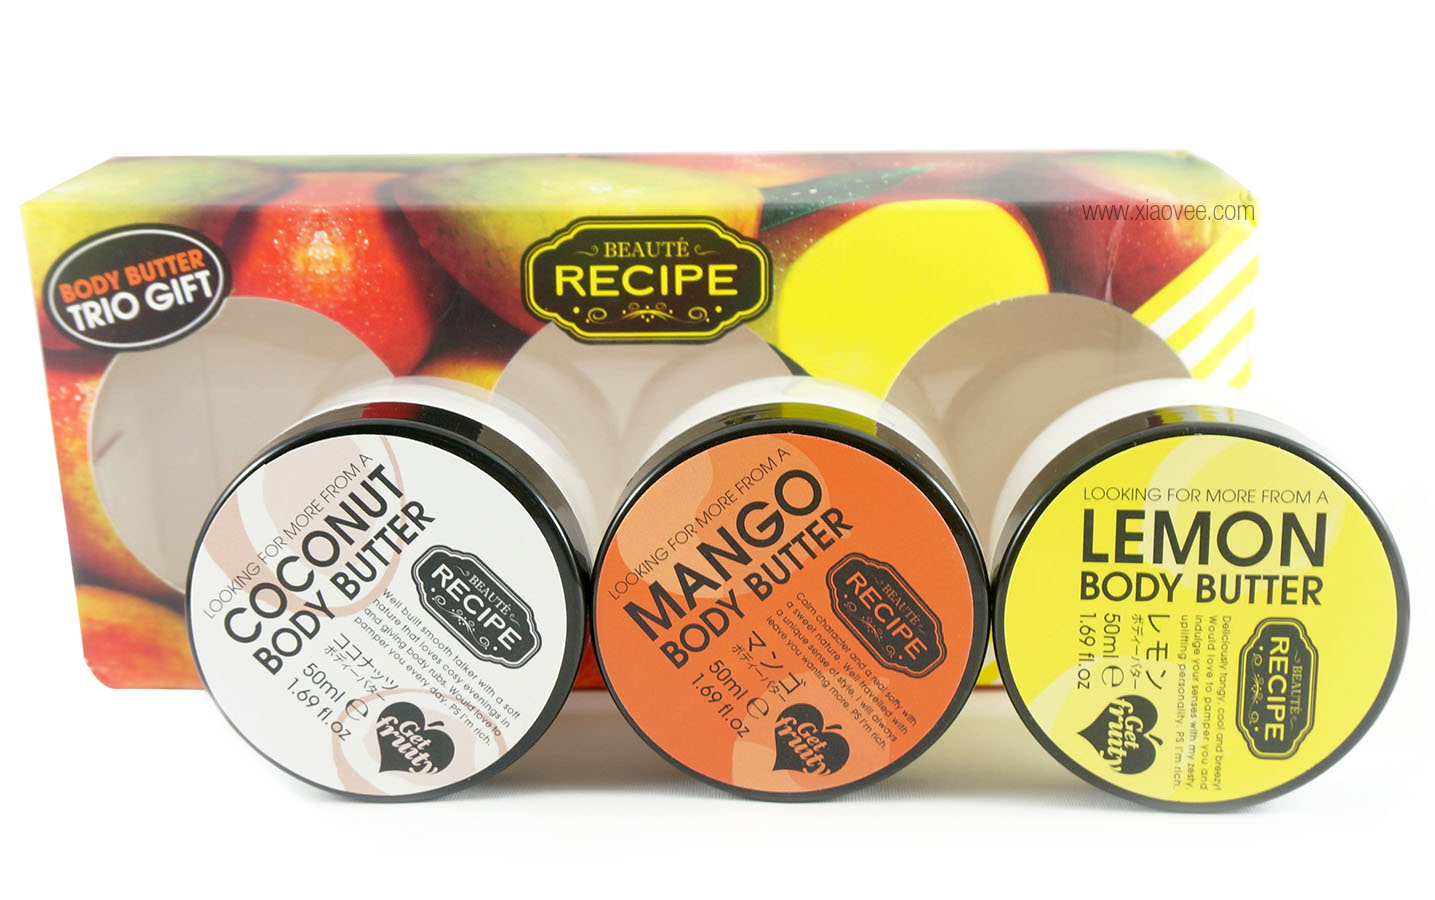 COPIA Indonesia, Beaute Recipe Fruit Body Butter Set Review, Japanese Coconut Body Butter, Japanese Mango Body Butter, Japanese Lemon Body Butter, Japanese Fruit Body Butter, Best Japanese Body Butter